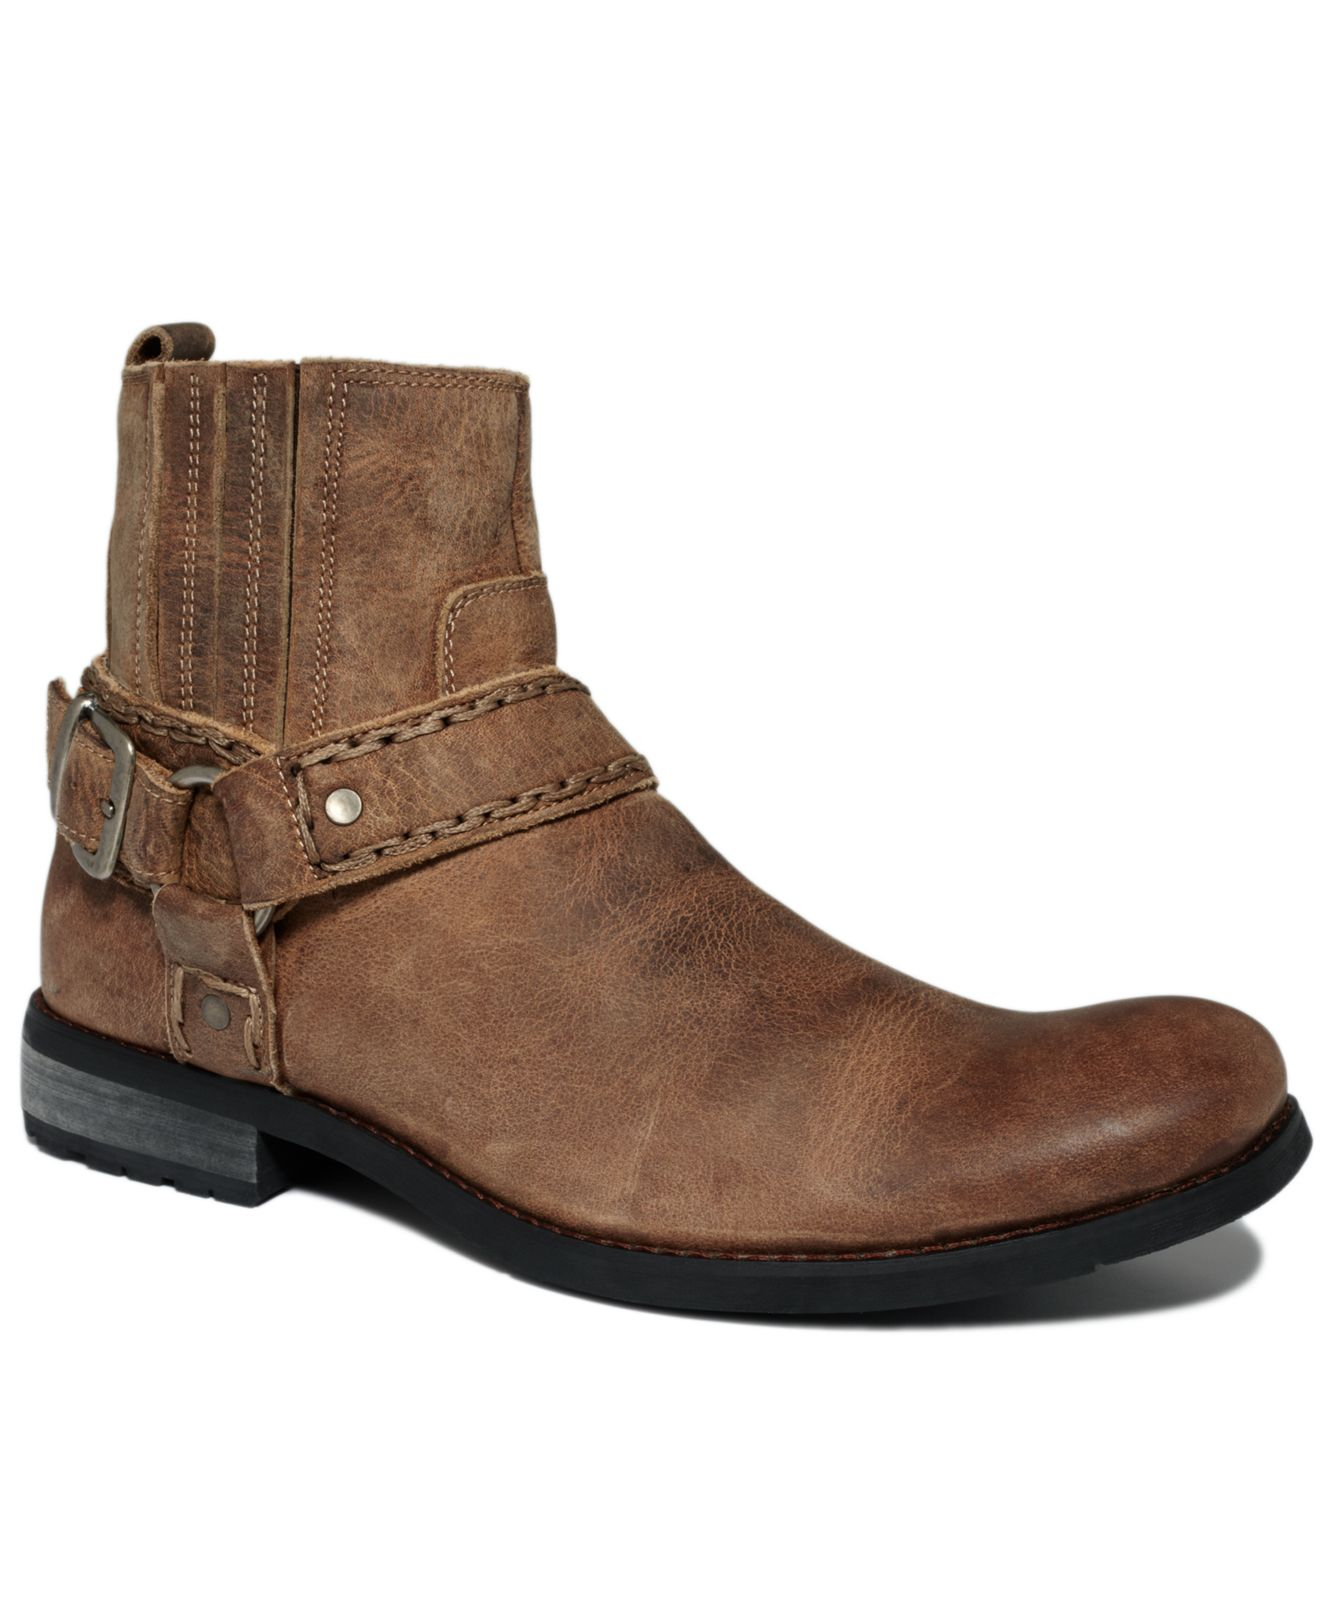 Bed Stu Bed Stu. Innovator Boots in Brown for Men - Lyst